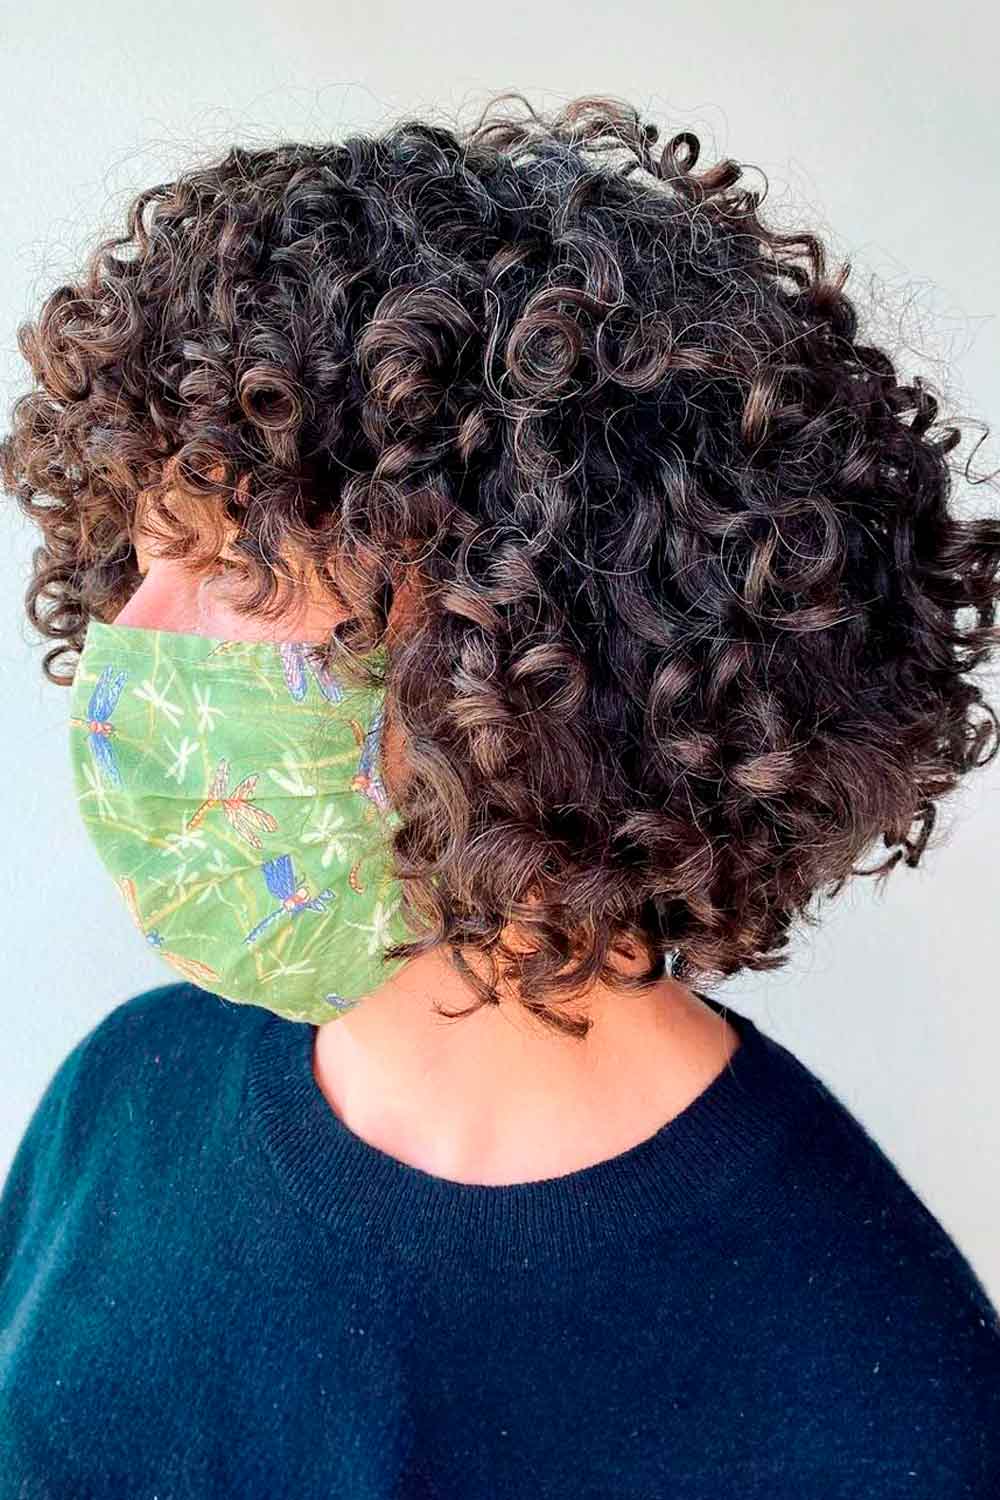 A-line Curly Bob #curlybob #haircuts #bobhaircuts #curlyhairstyles